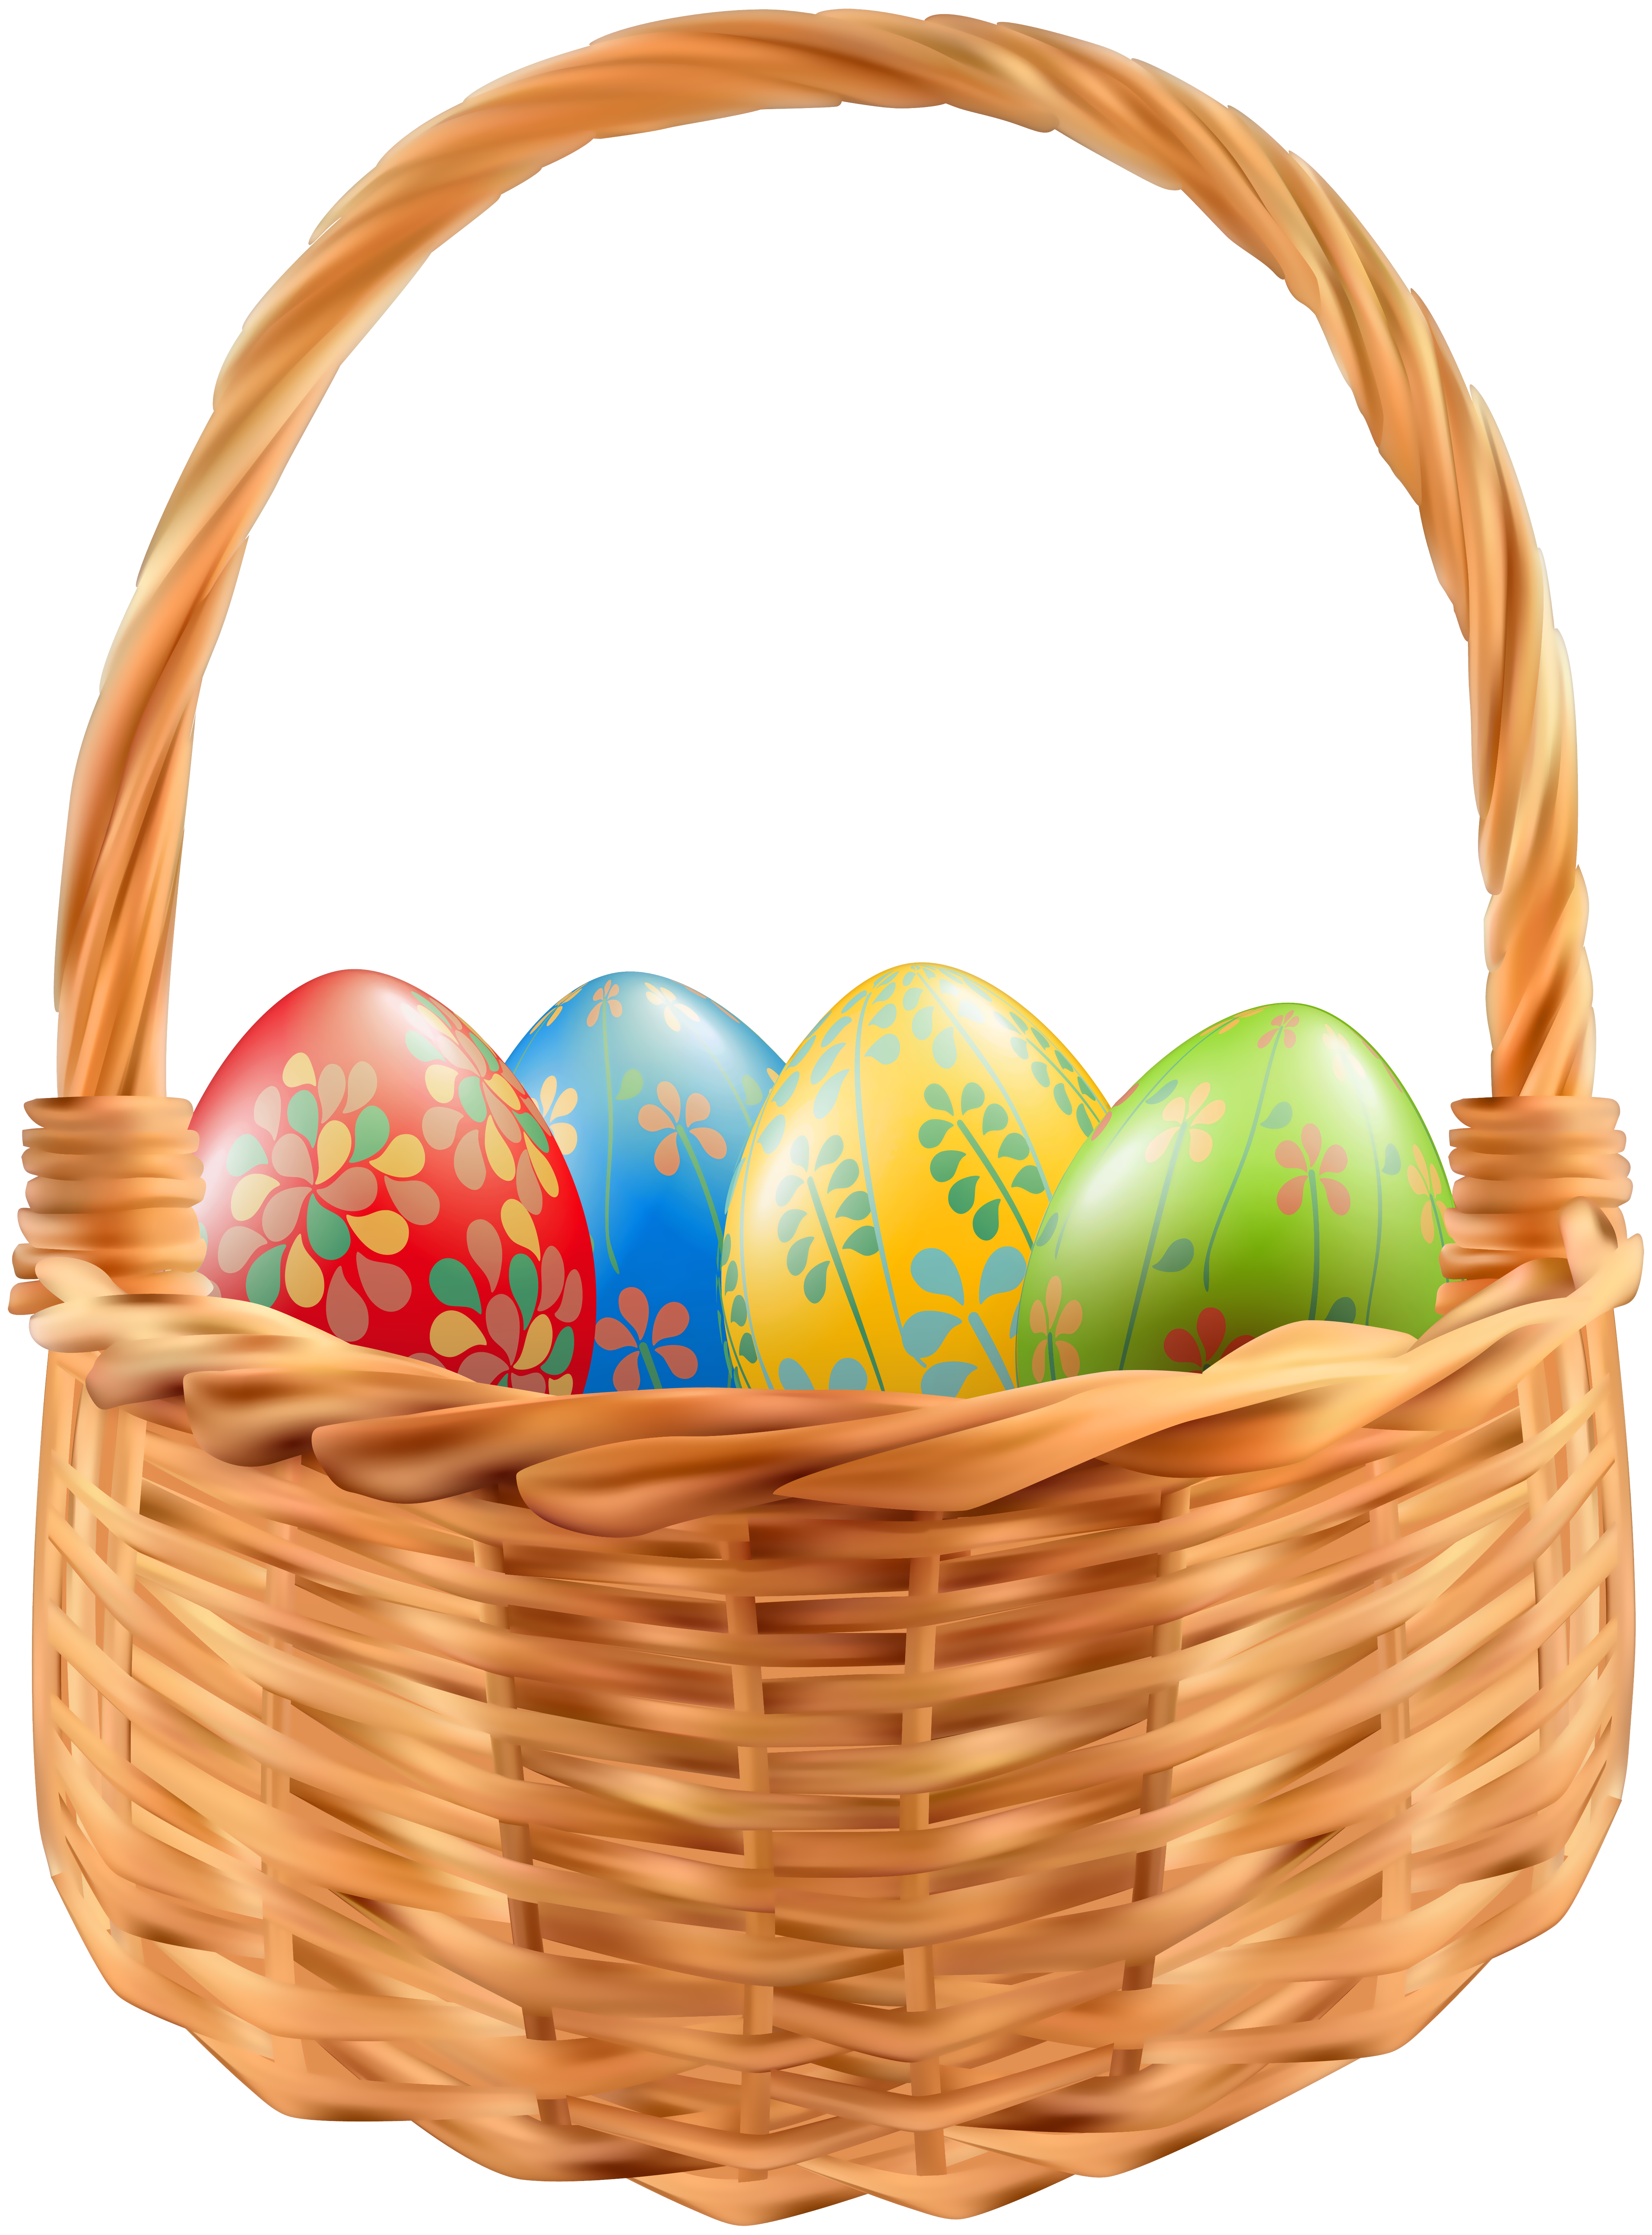 Easter Basket Png Clip Art Image Gallery Yopriceville High Quality Images And Transparent Png Free Clipart